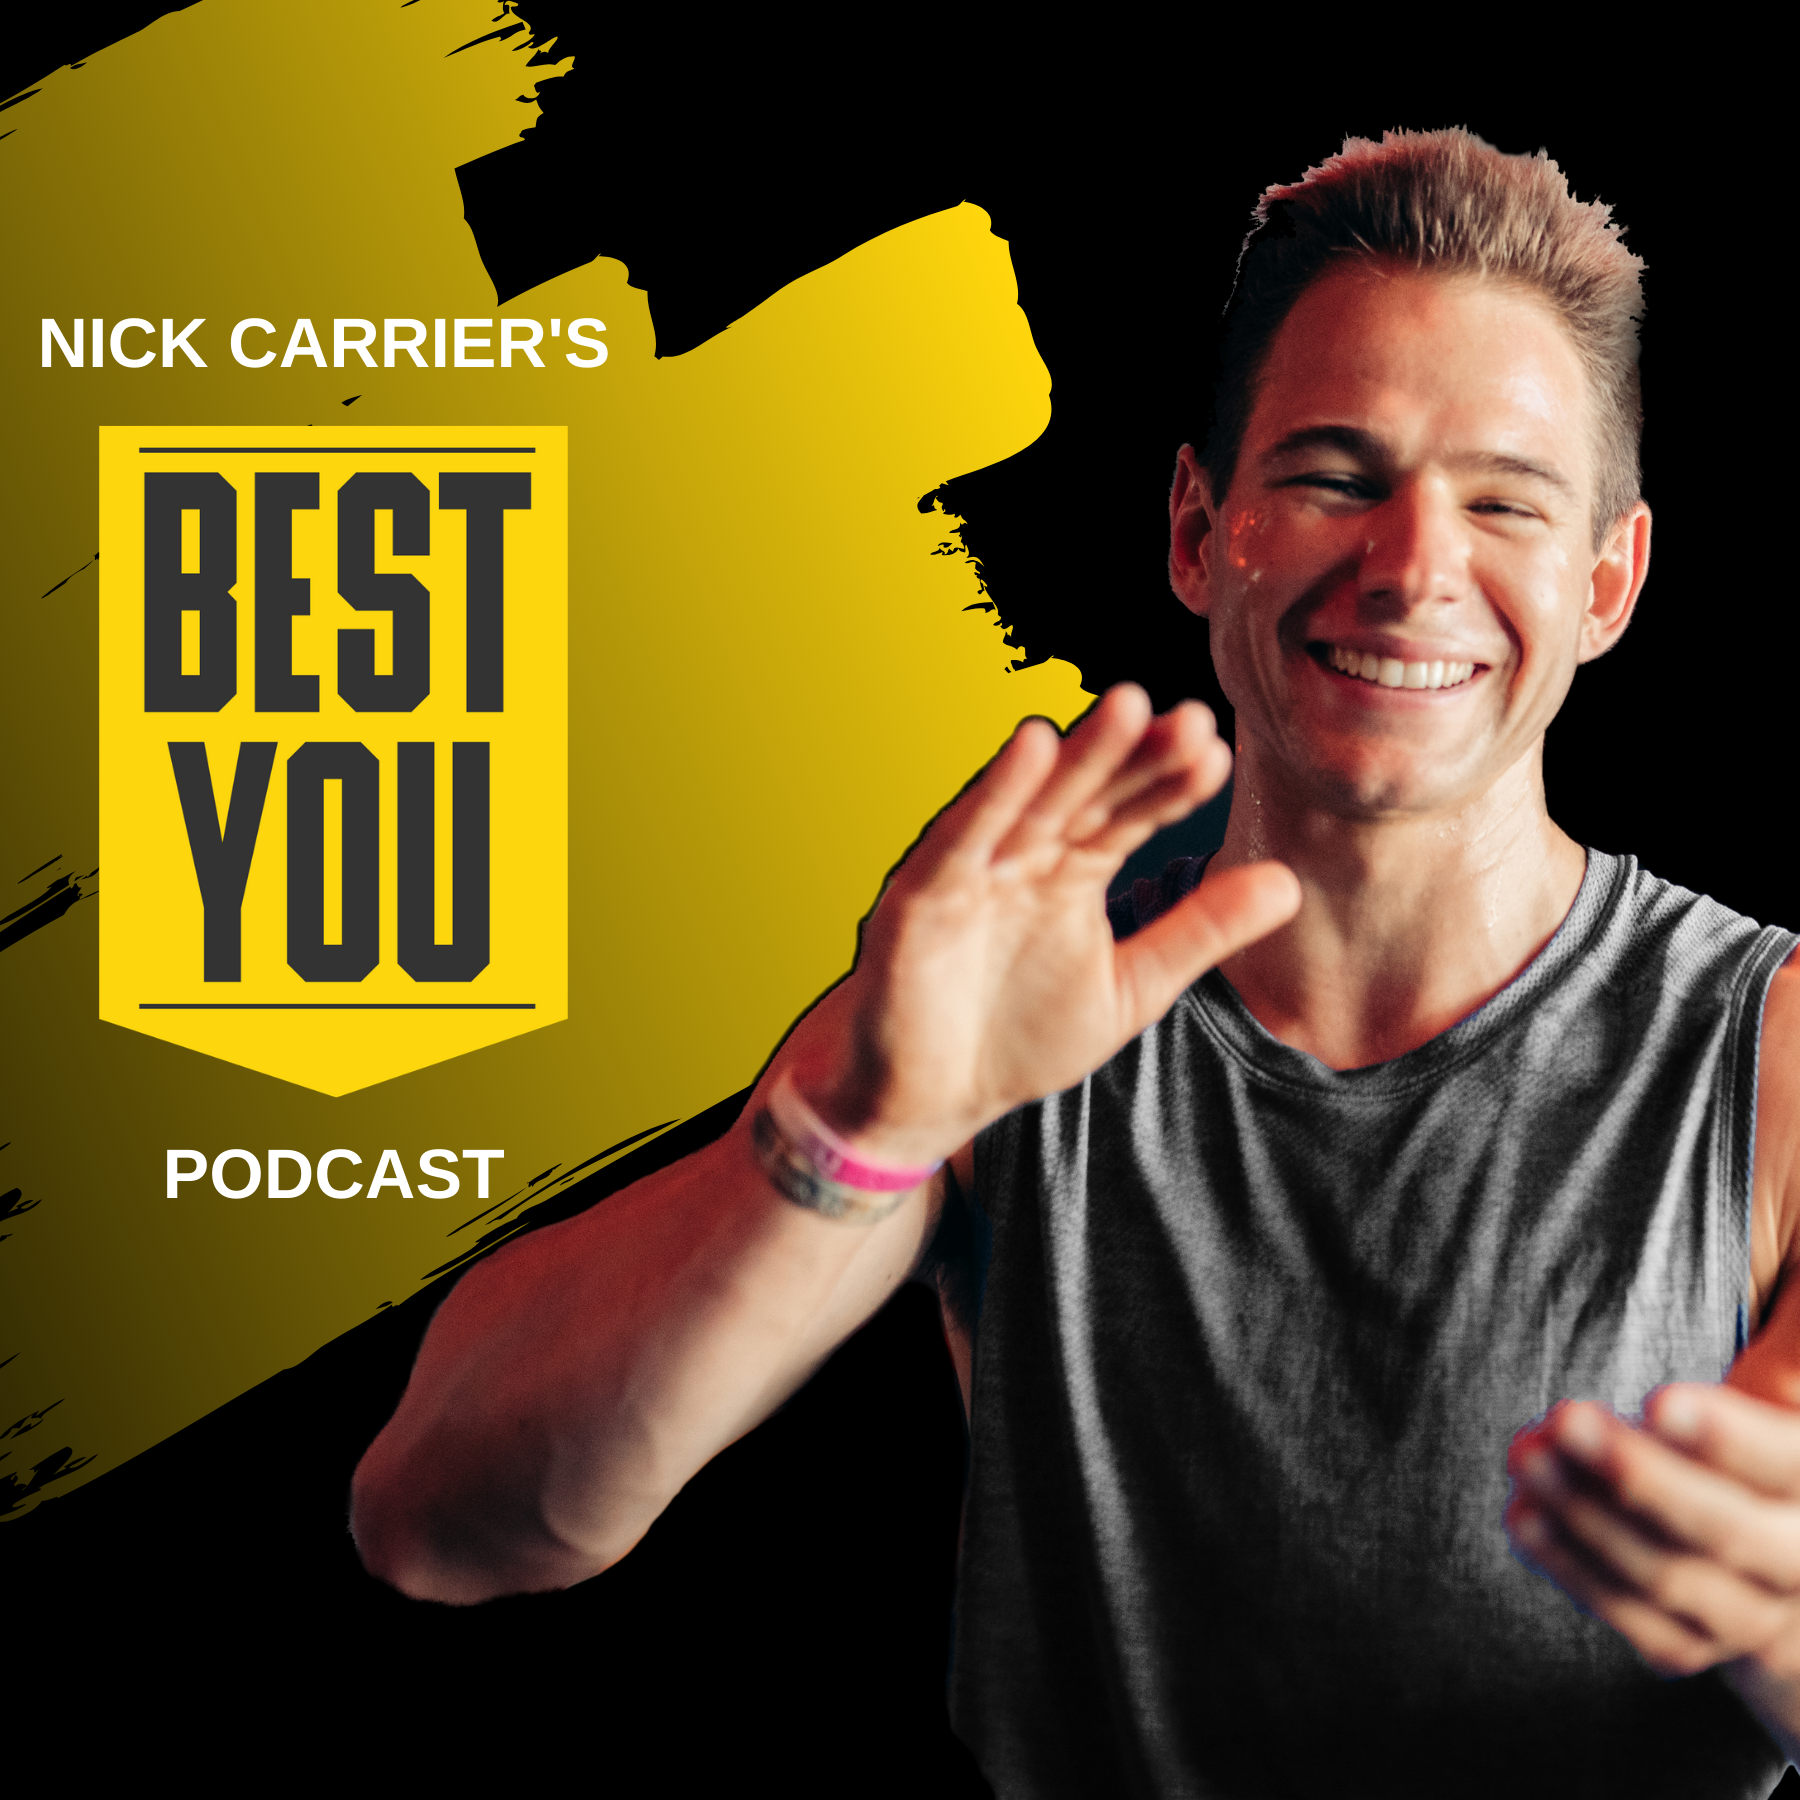 198. Nick's 3 Takeaways - Self Compassion is KEY to Learning